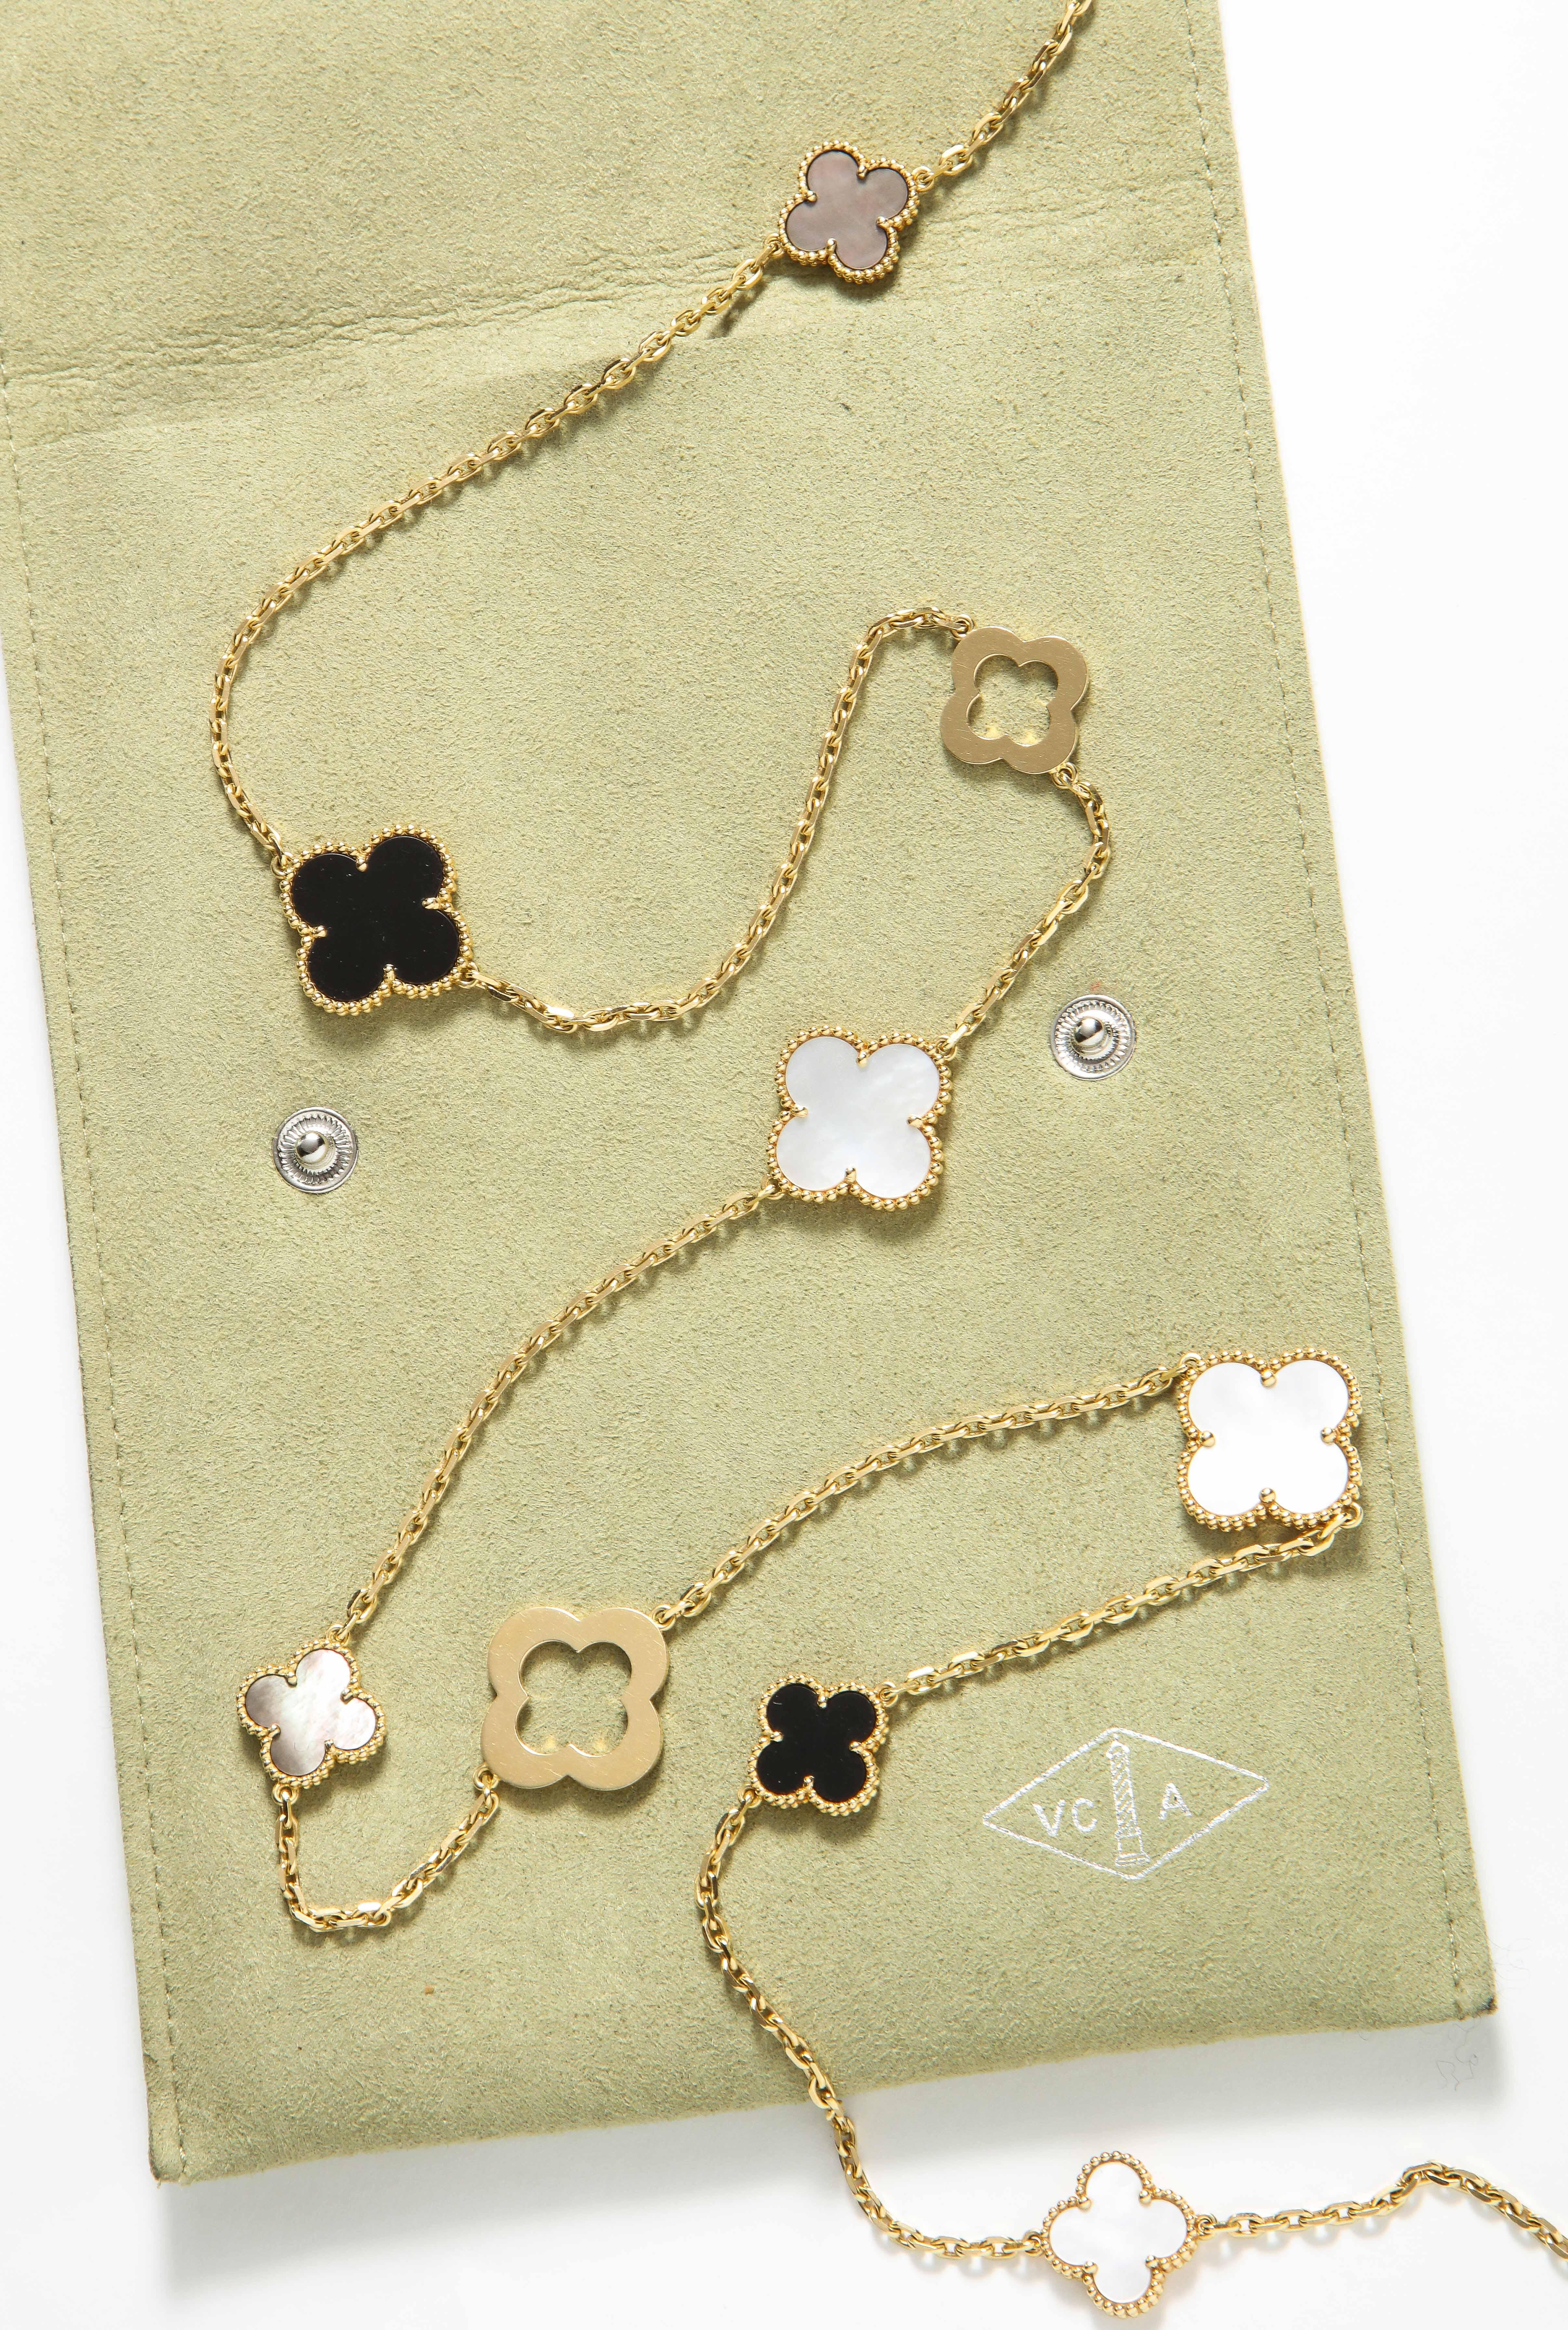 Van Cleef & Arpels & Chloe, a Rare, Limited-Edition 18K Gold Alhambra Necklace 5